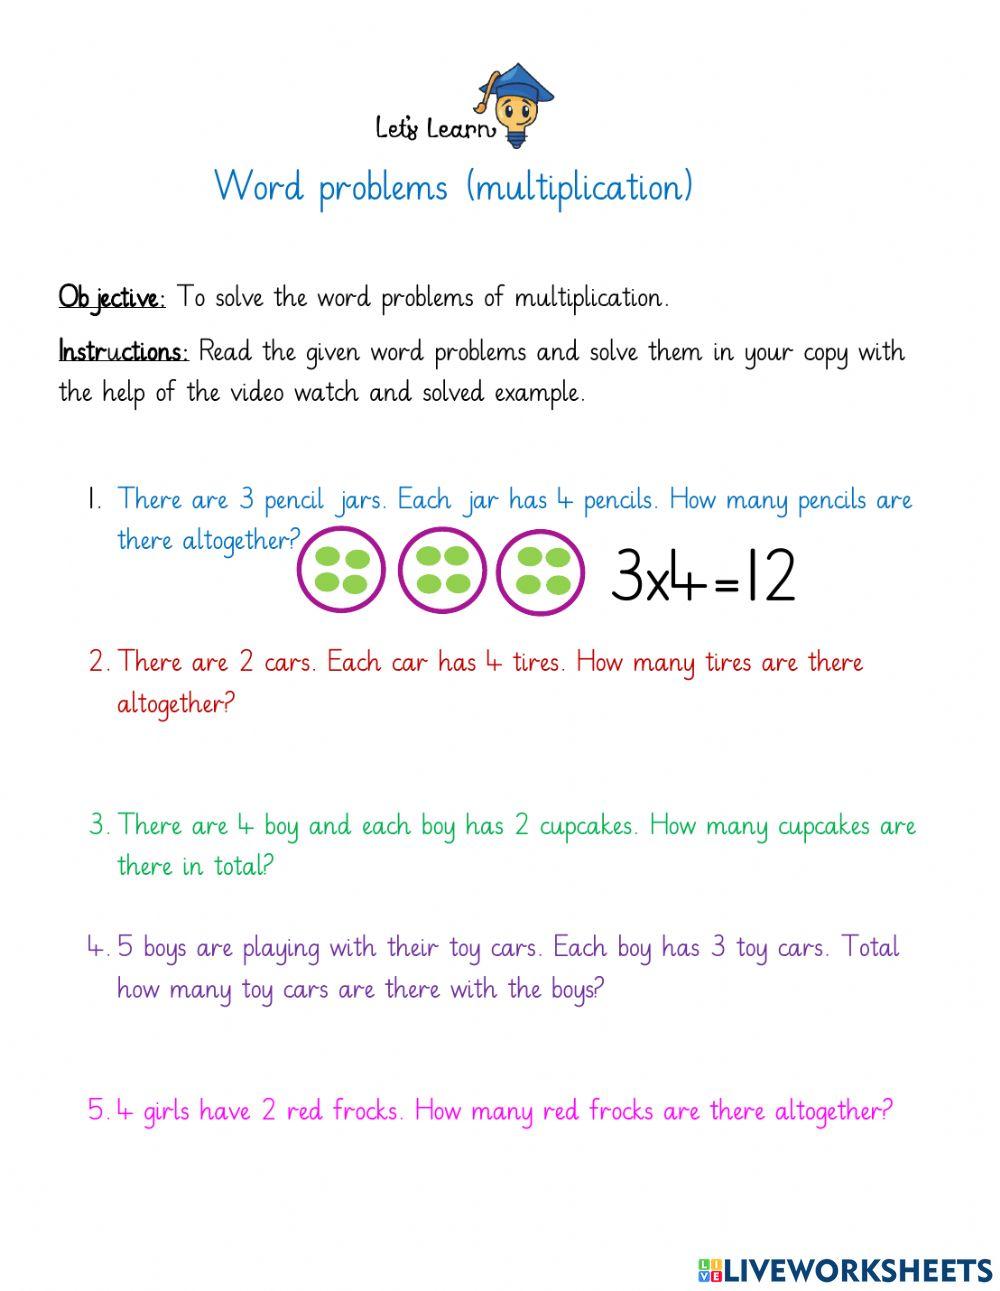 Word problems multiplication